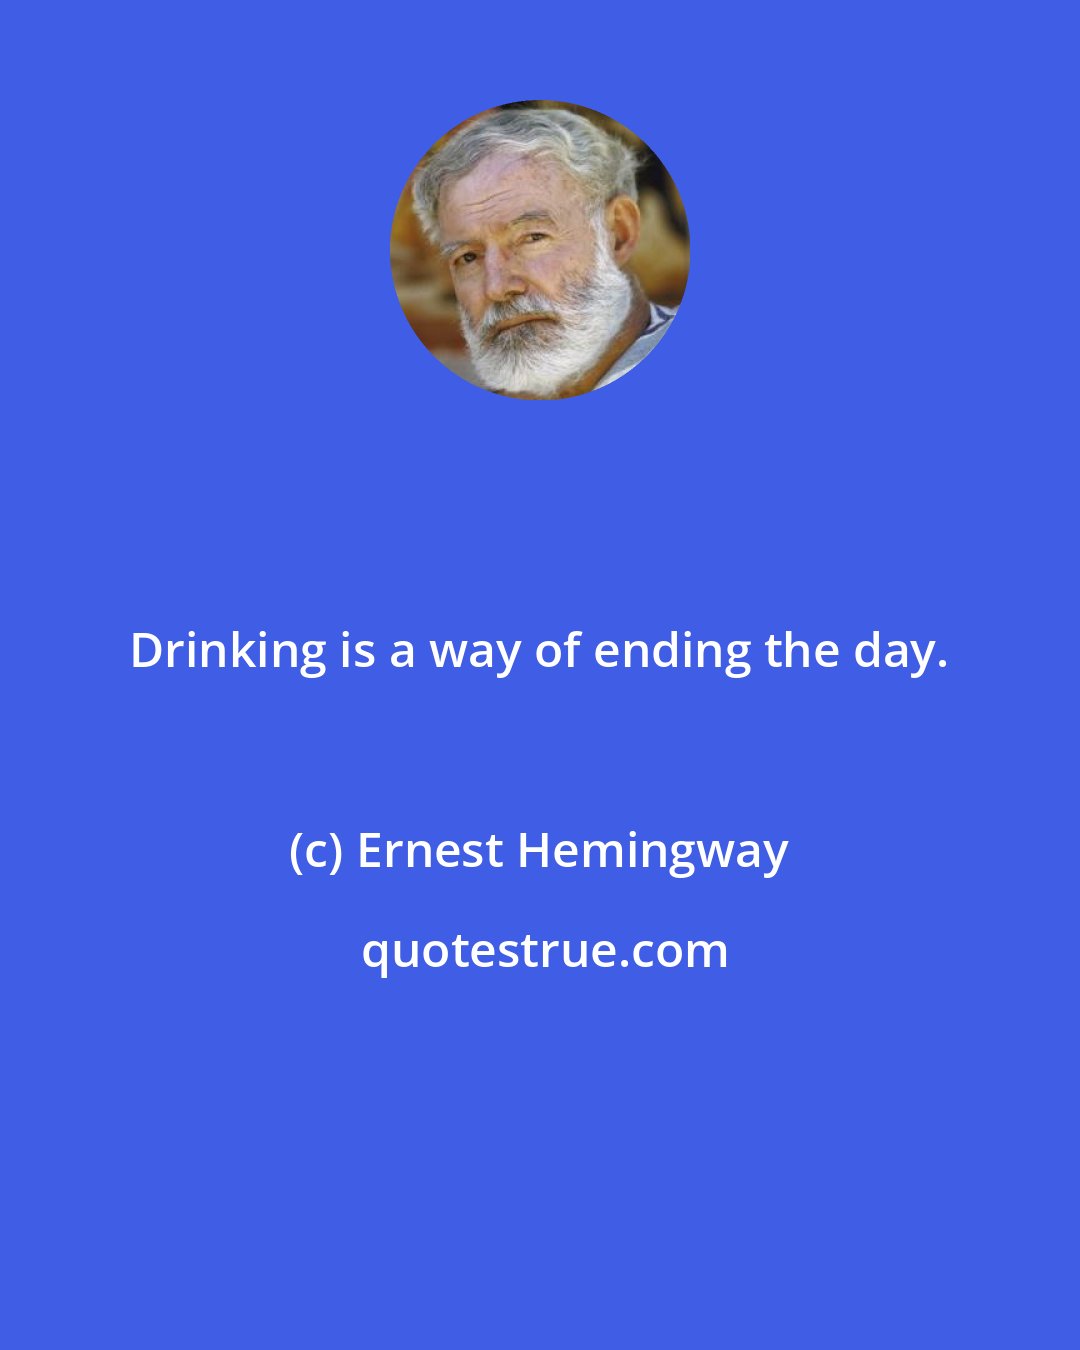 Ernest Hemingway: Drinking is a way of ending the day.